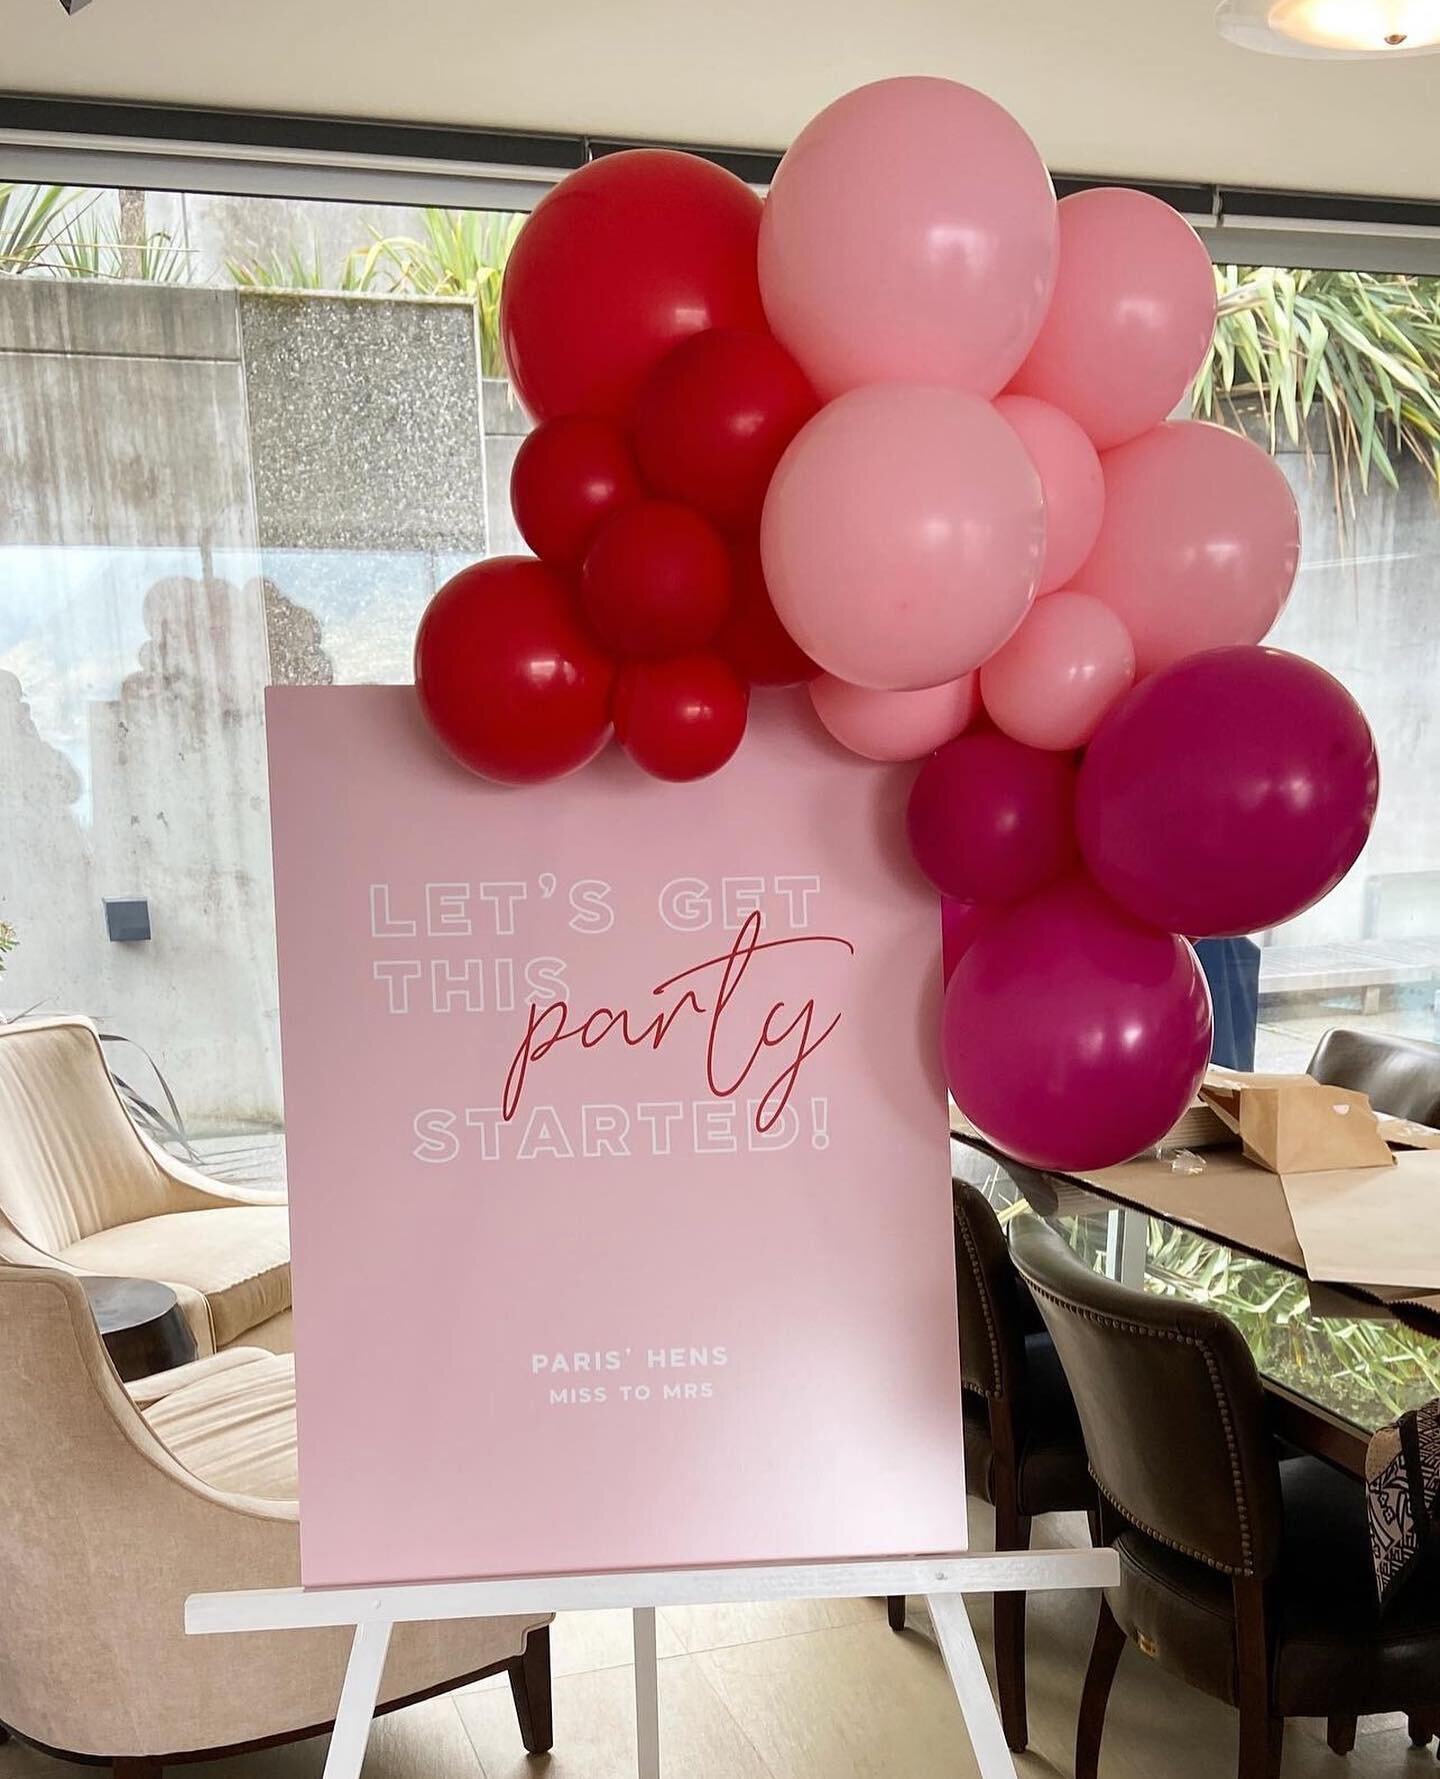 &mdash;&mdash; yes, queenstown 💘 

The girls know how to throw a party! &amp; Balloons always elevate everything x